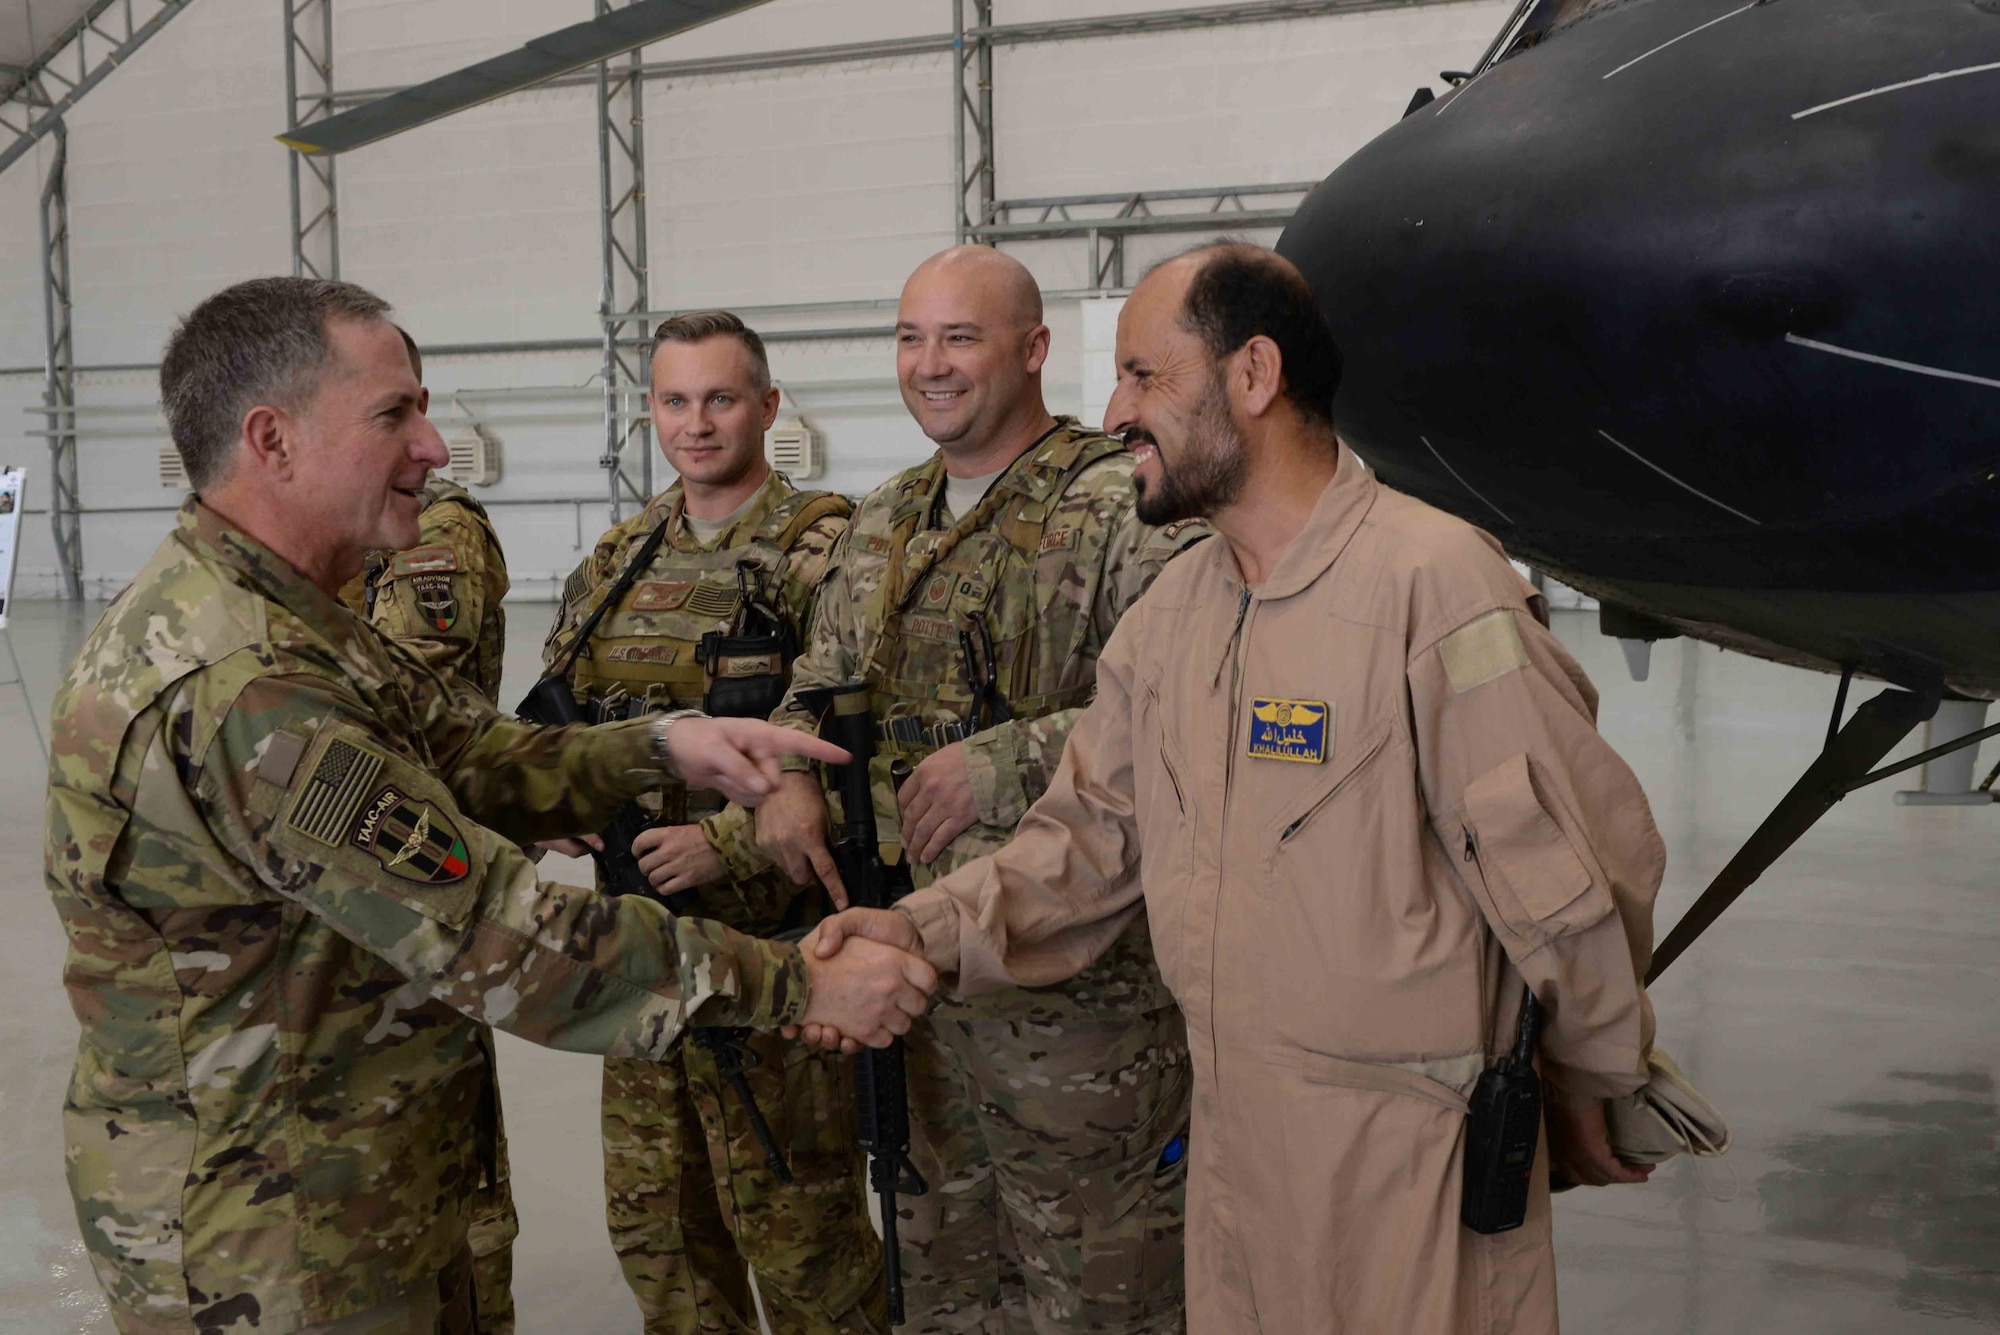 Gen. David Goldfein, Air Force Chief of Staff, visited the 438th Air Expeditionary Wing, Kabul, Afghanistan, Aug. 13, 2016. Goldfein met with Train, Advise, Assist Command-Air (TAAC-Air) leadership and received briefings about the progress of the Afghan air force. (U.S. Air Force photos by Tech. Sgt. Christopher Holmes and Capt. Jason Smith)